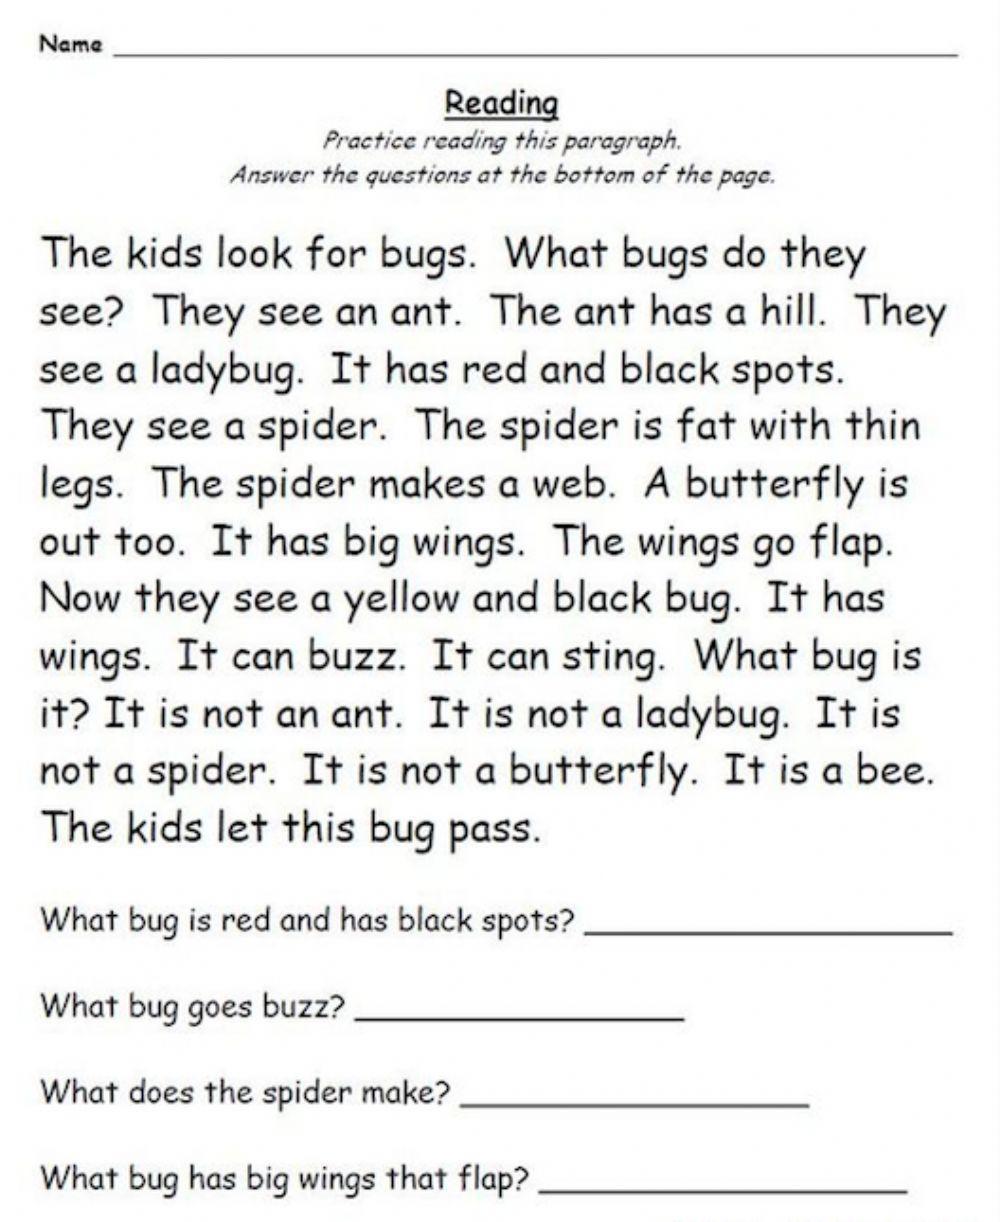 Reading Comprehension-Bugs